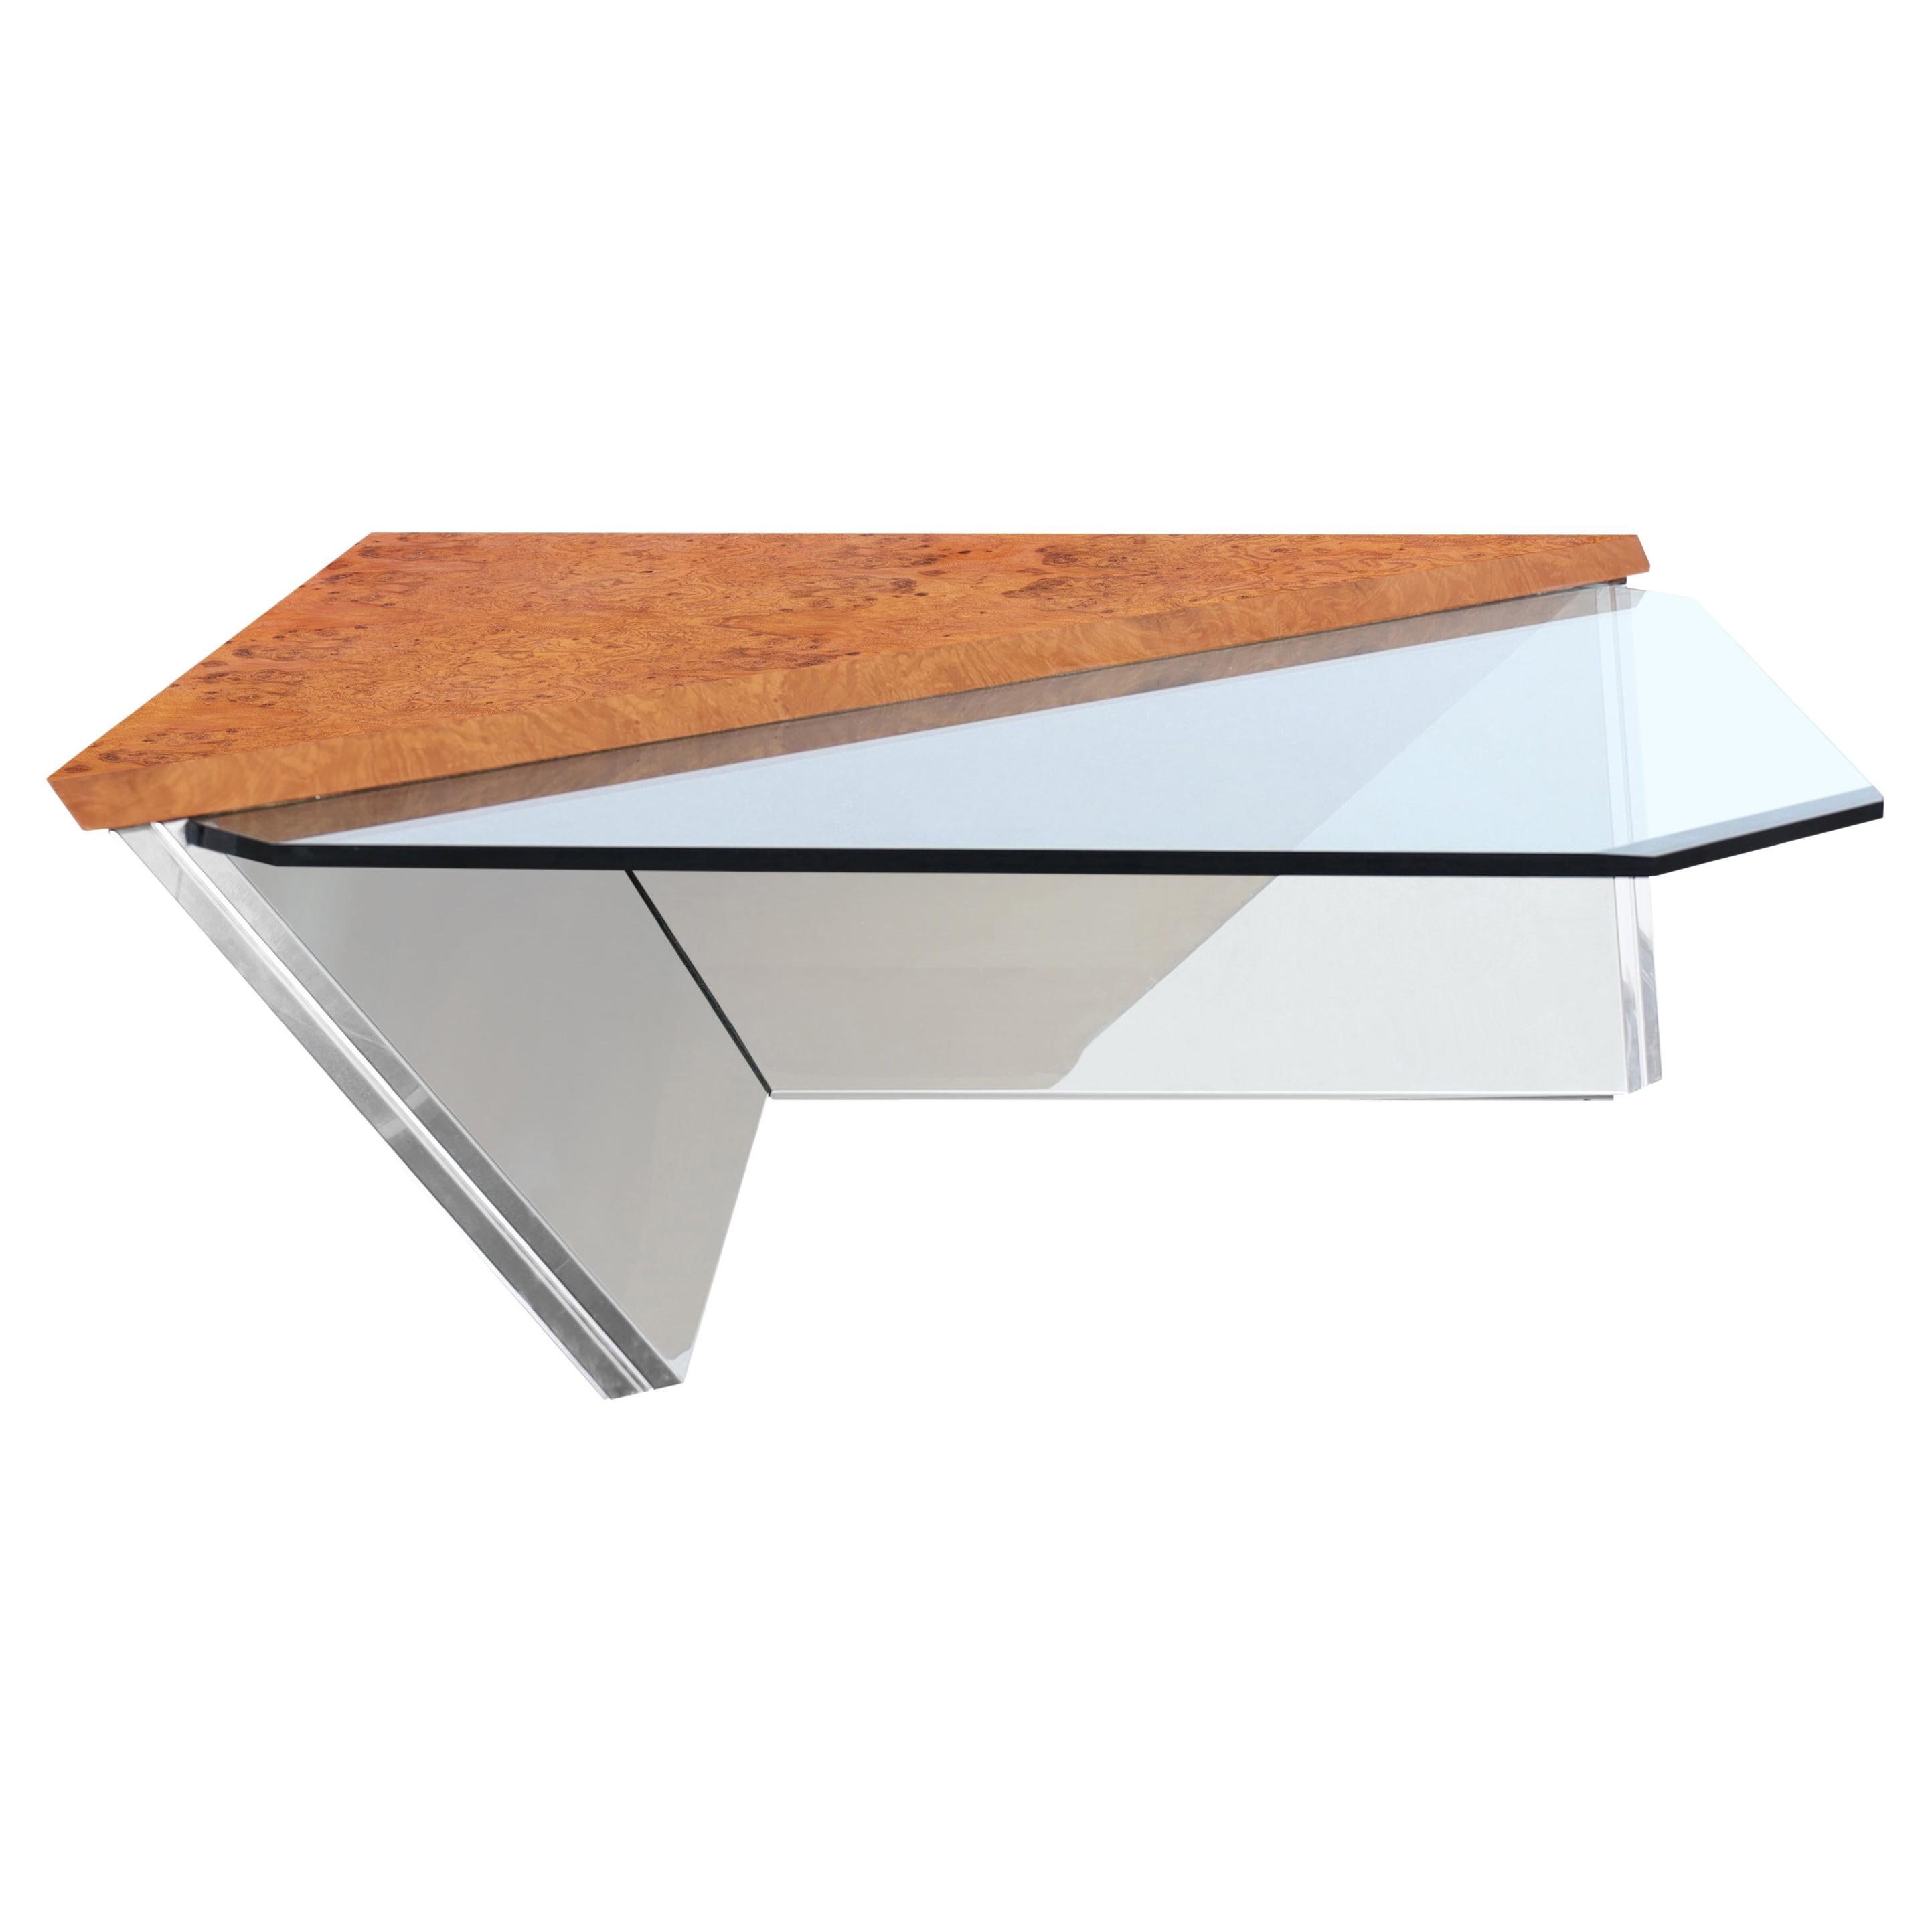 Vintage Stainless Steel Cantilevered Coffee Table Attributed to Brueton